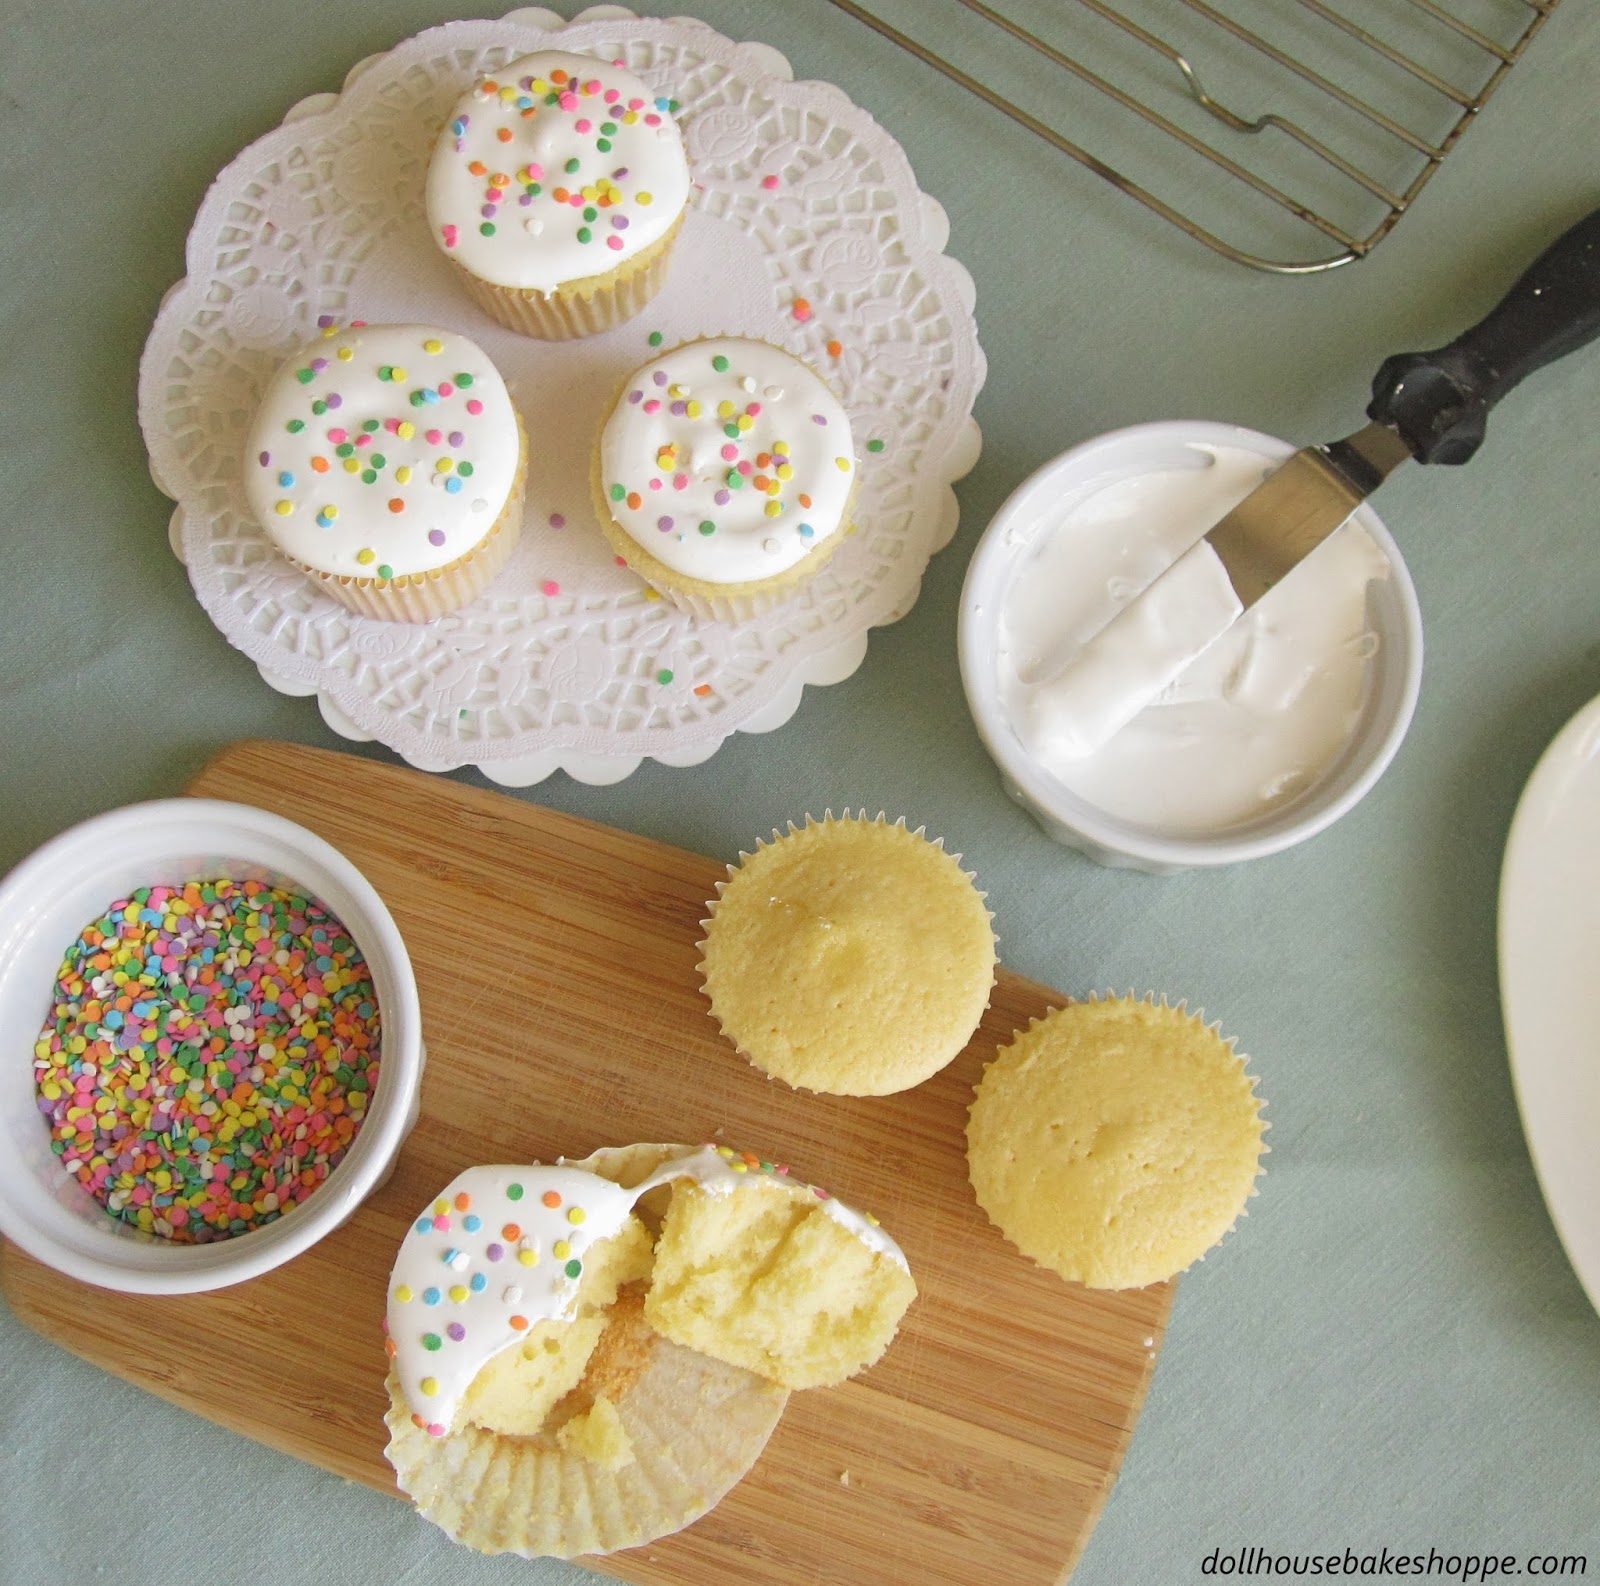 Homemade Vanilla Cupcakes From Scratch